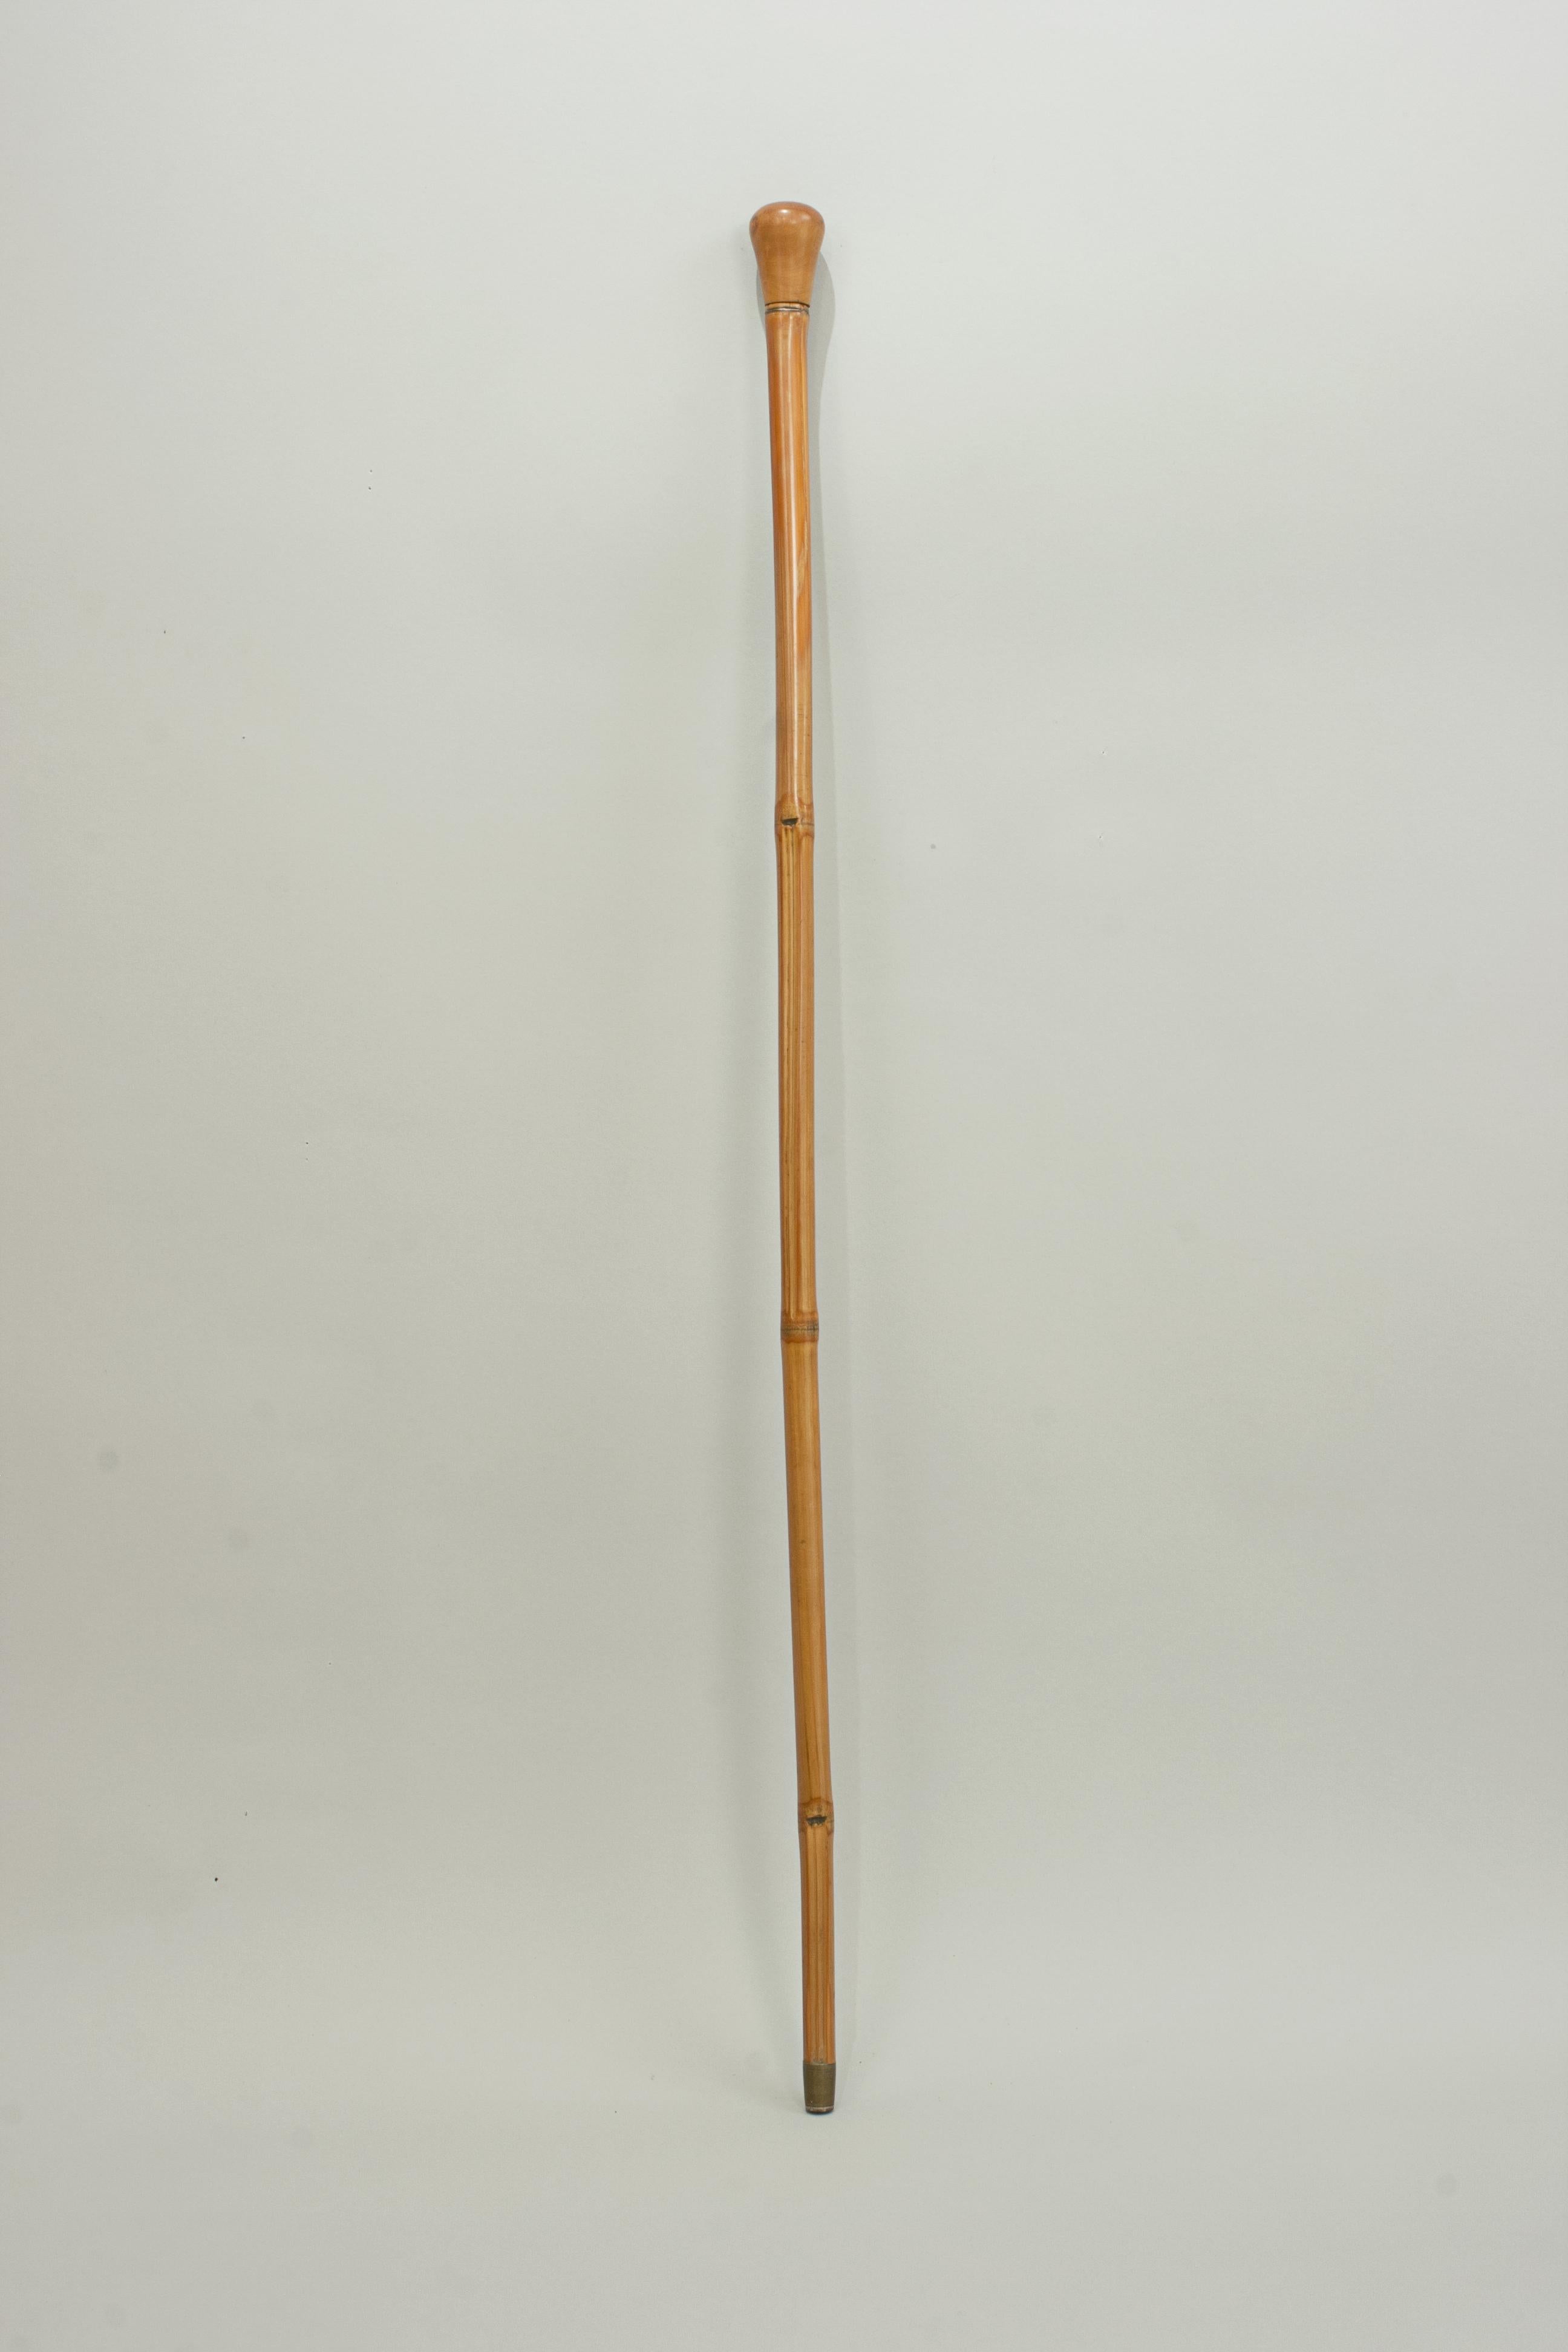 Antique Horse Measure Stick by Arnold and Sons 2